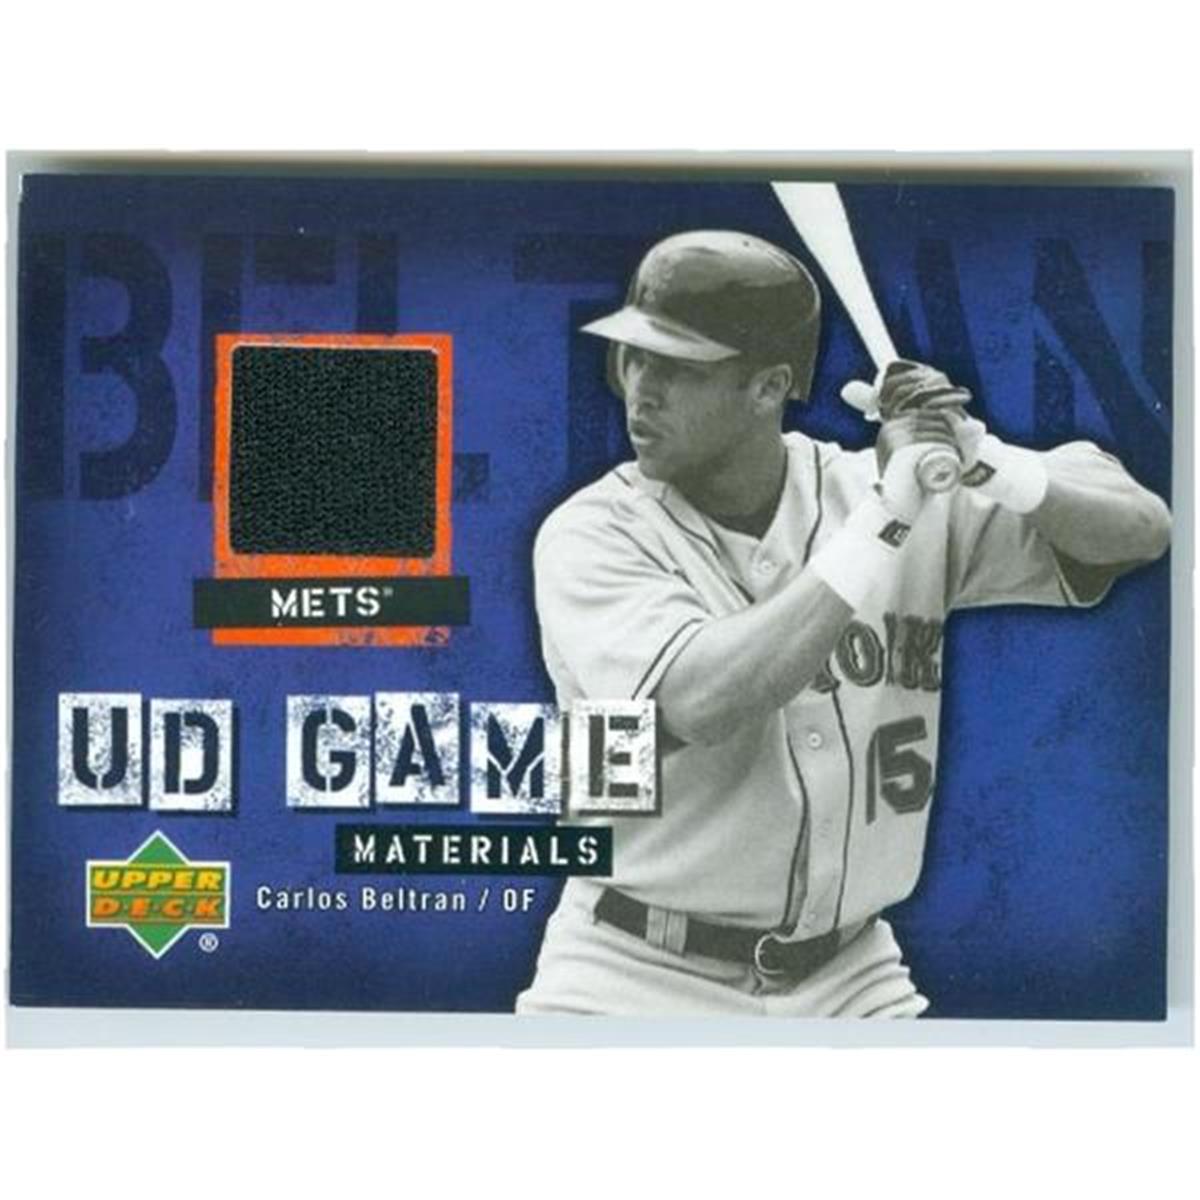 Picture of Autograph Warehouse 365407 Carlos Beltran Player Worn Jersey Patch Baseball Card - 2006 Upper Deck UDCB